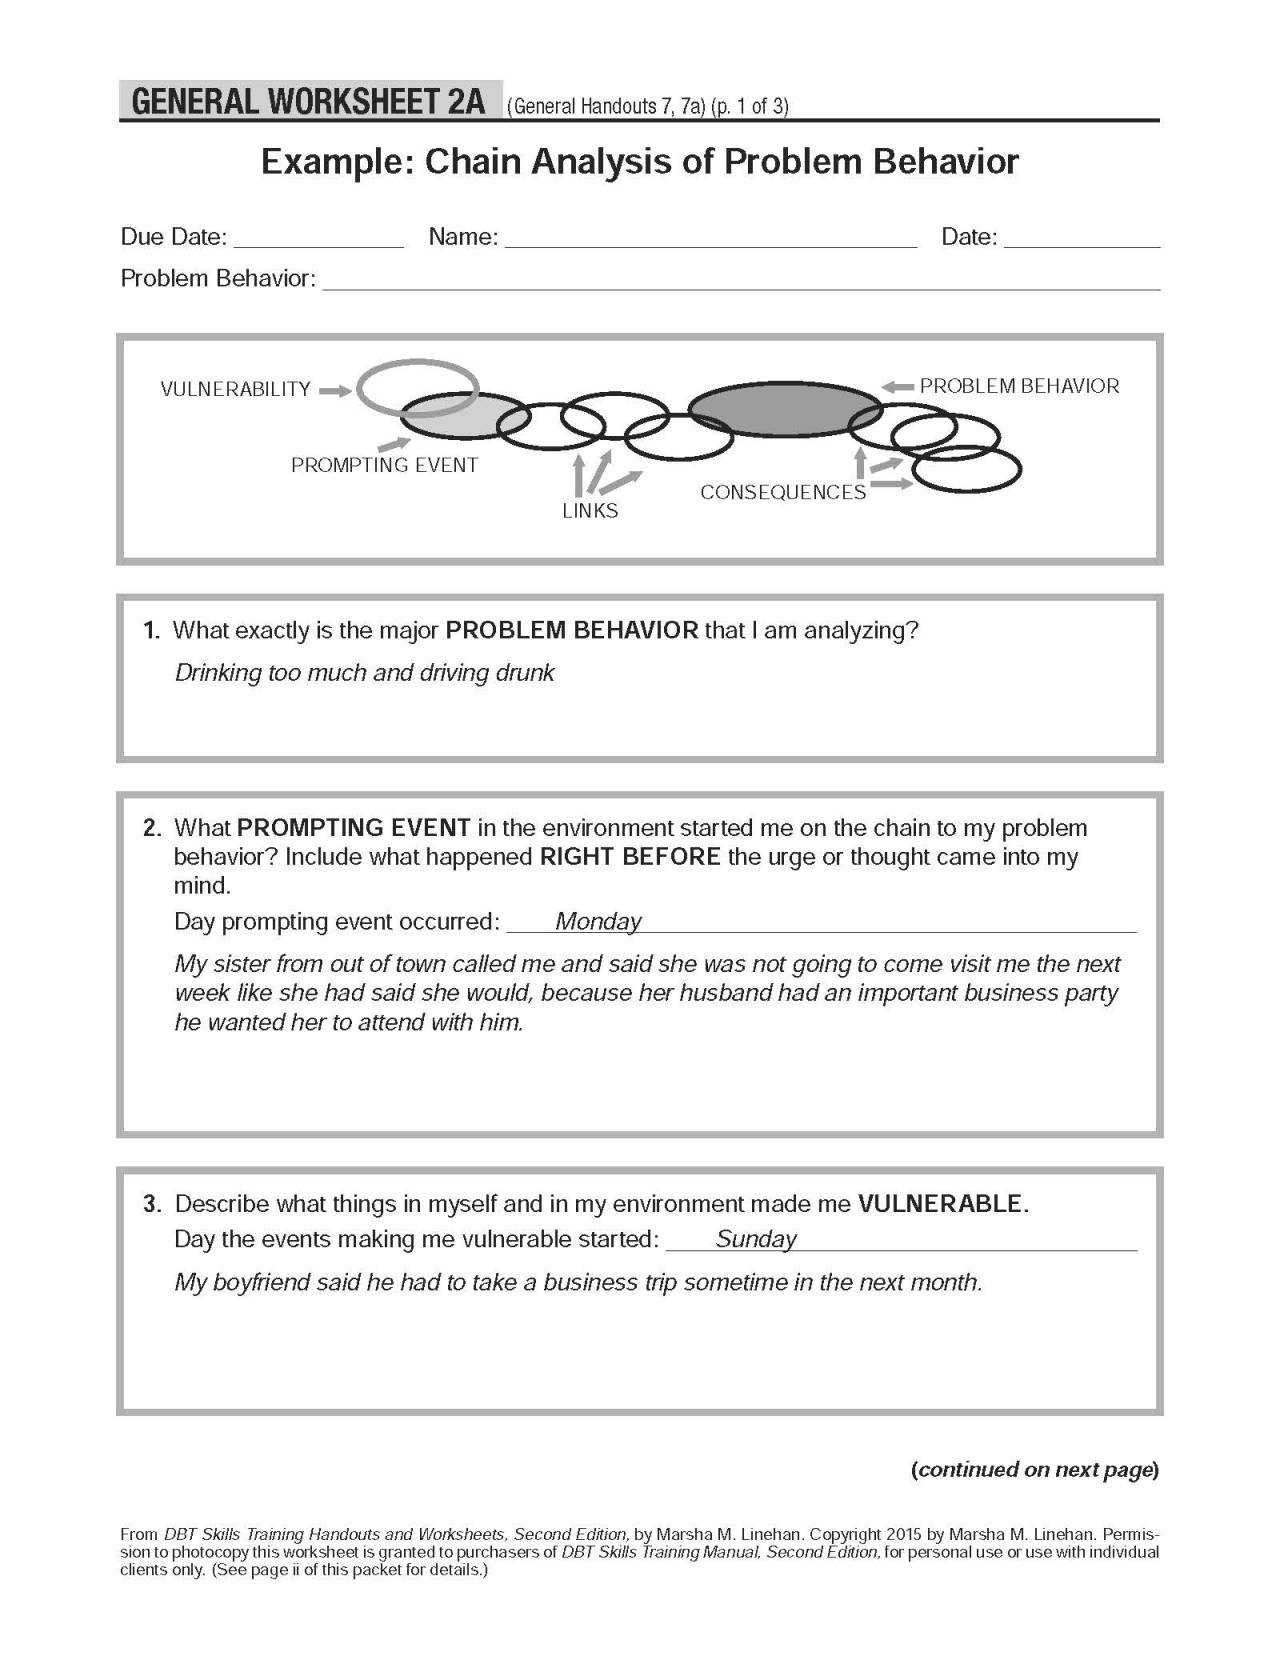 Dbt therapy Worksheets together with Linehan Dbt Worksheets the Best Worksheets Image Collection